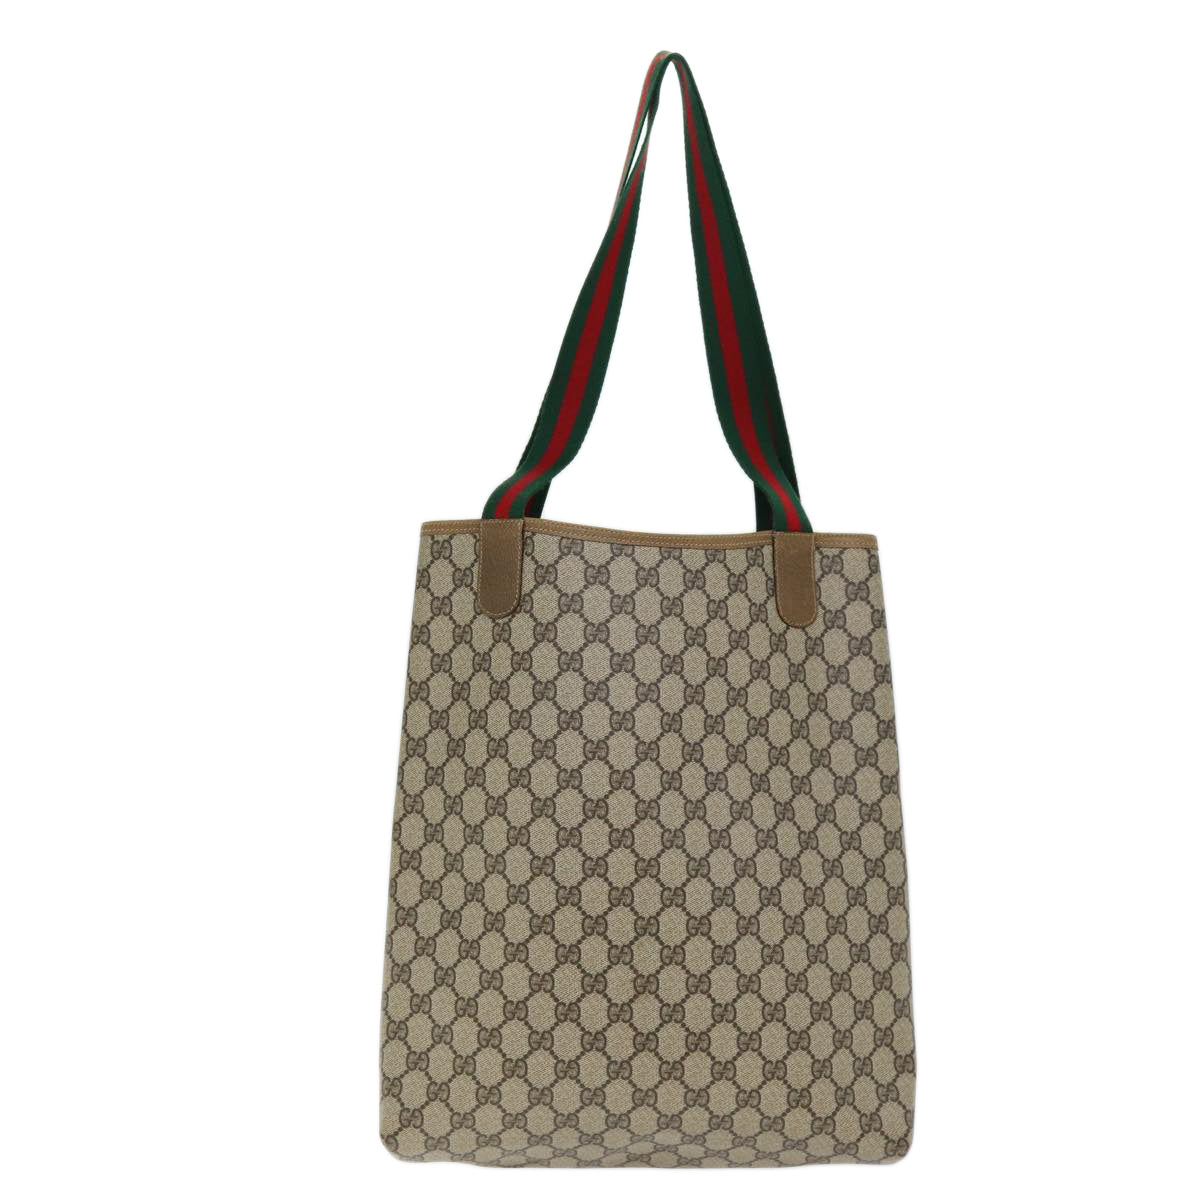 GUCCI GG Supreme Web Sherry Line Tote Bag PVC Beige Red 89 02 003 Auth yk12548 - 0